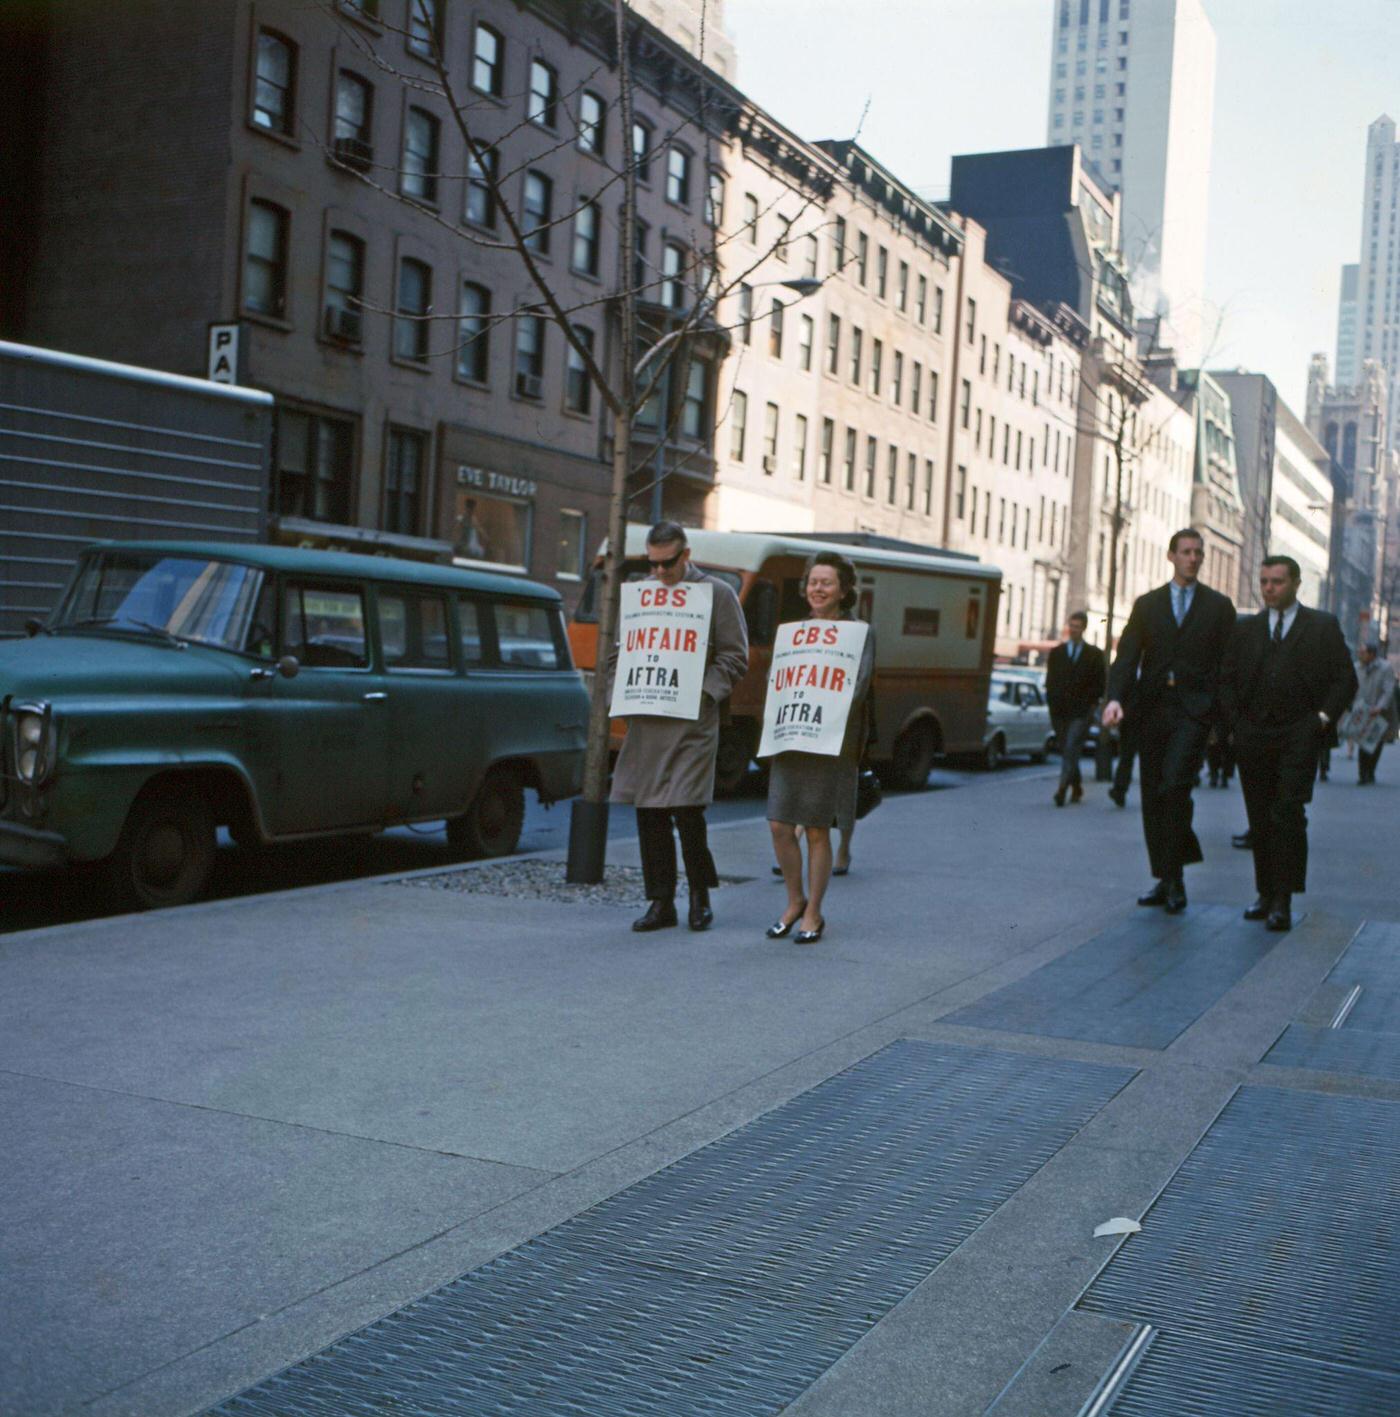 Cbs Television Employees Picket In Support Of Aftra Union Strike, Downtown Manhattan, 1967